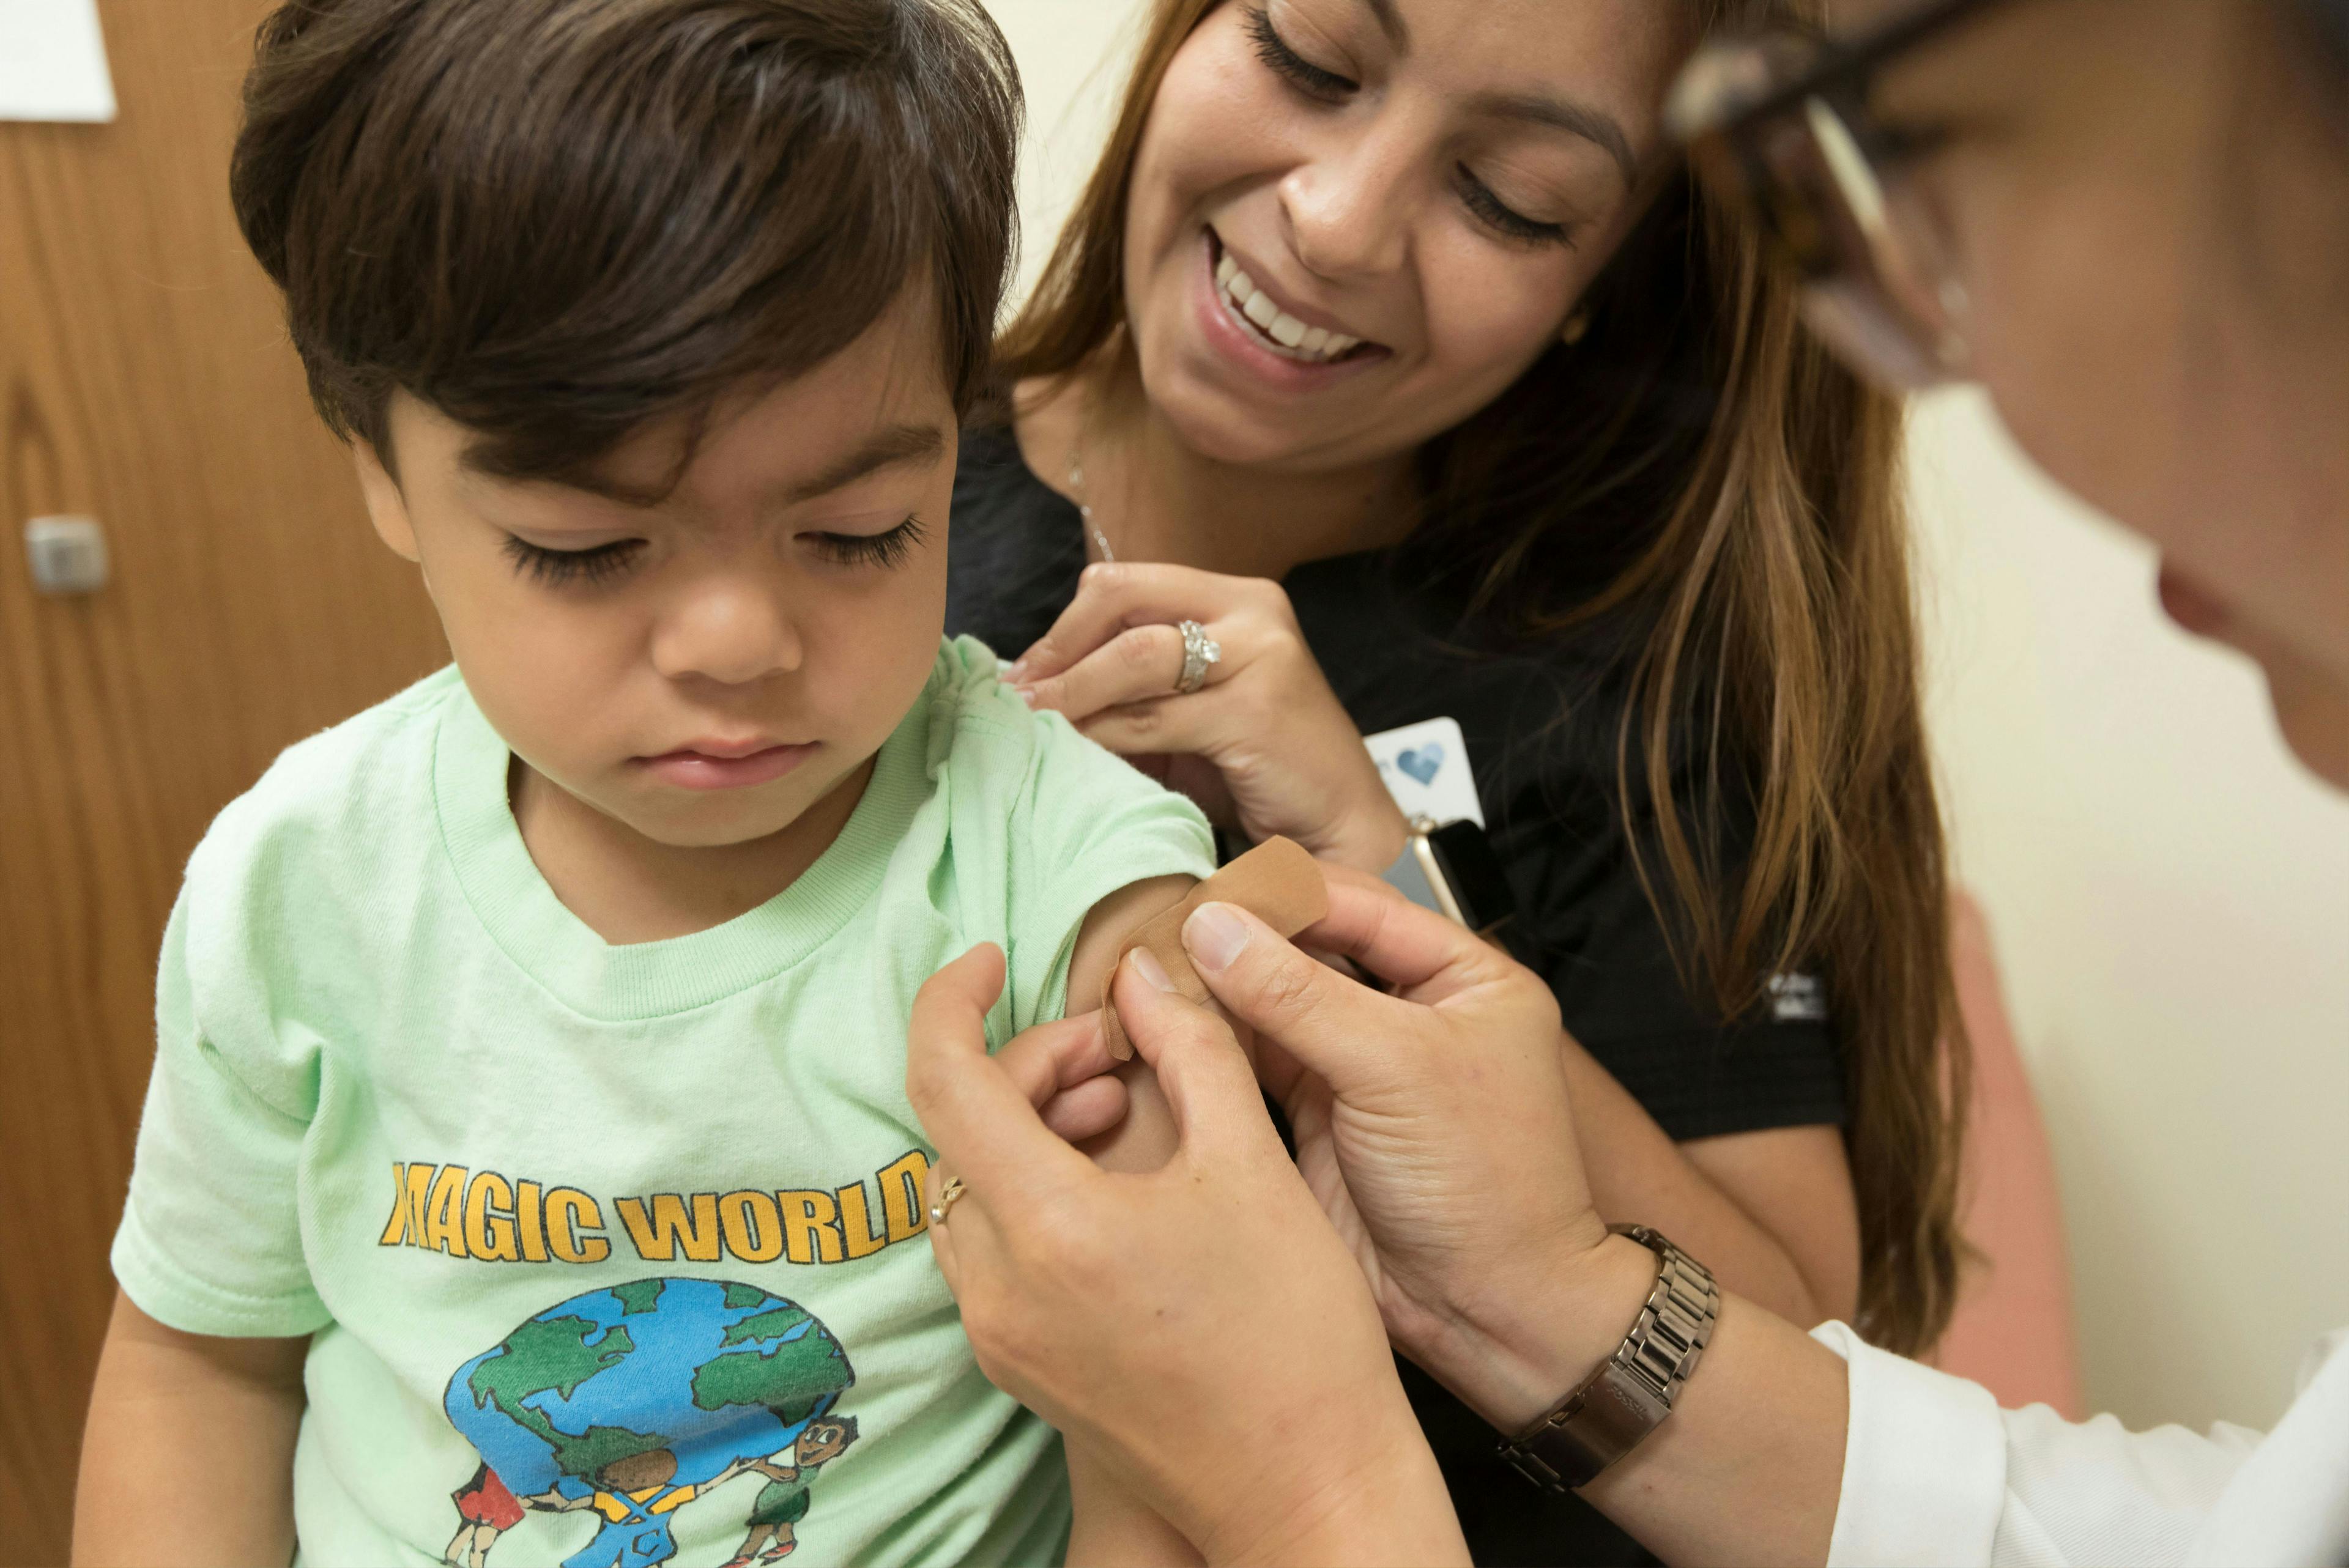 Cell-Based Flu Shots May Be More Cost-Effective, Beneficial for Pediatric Population